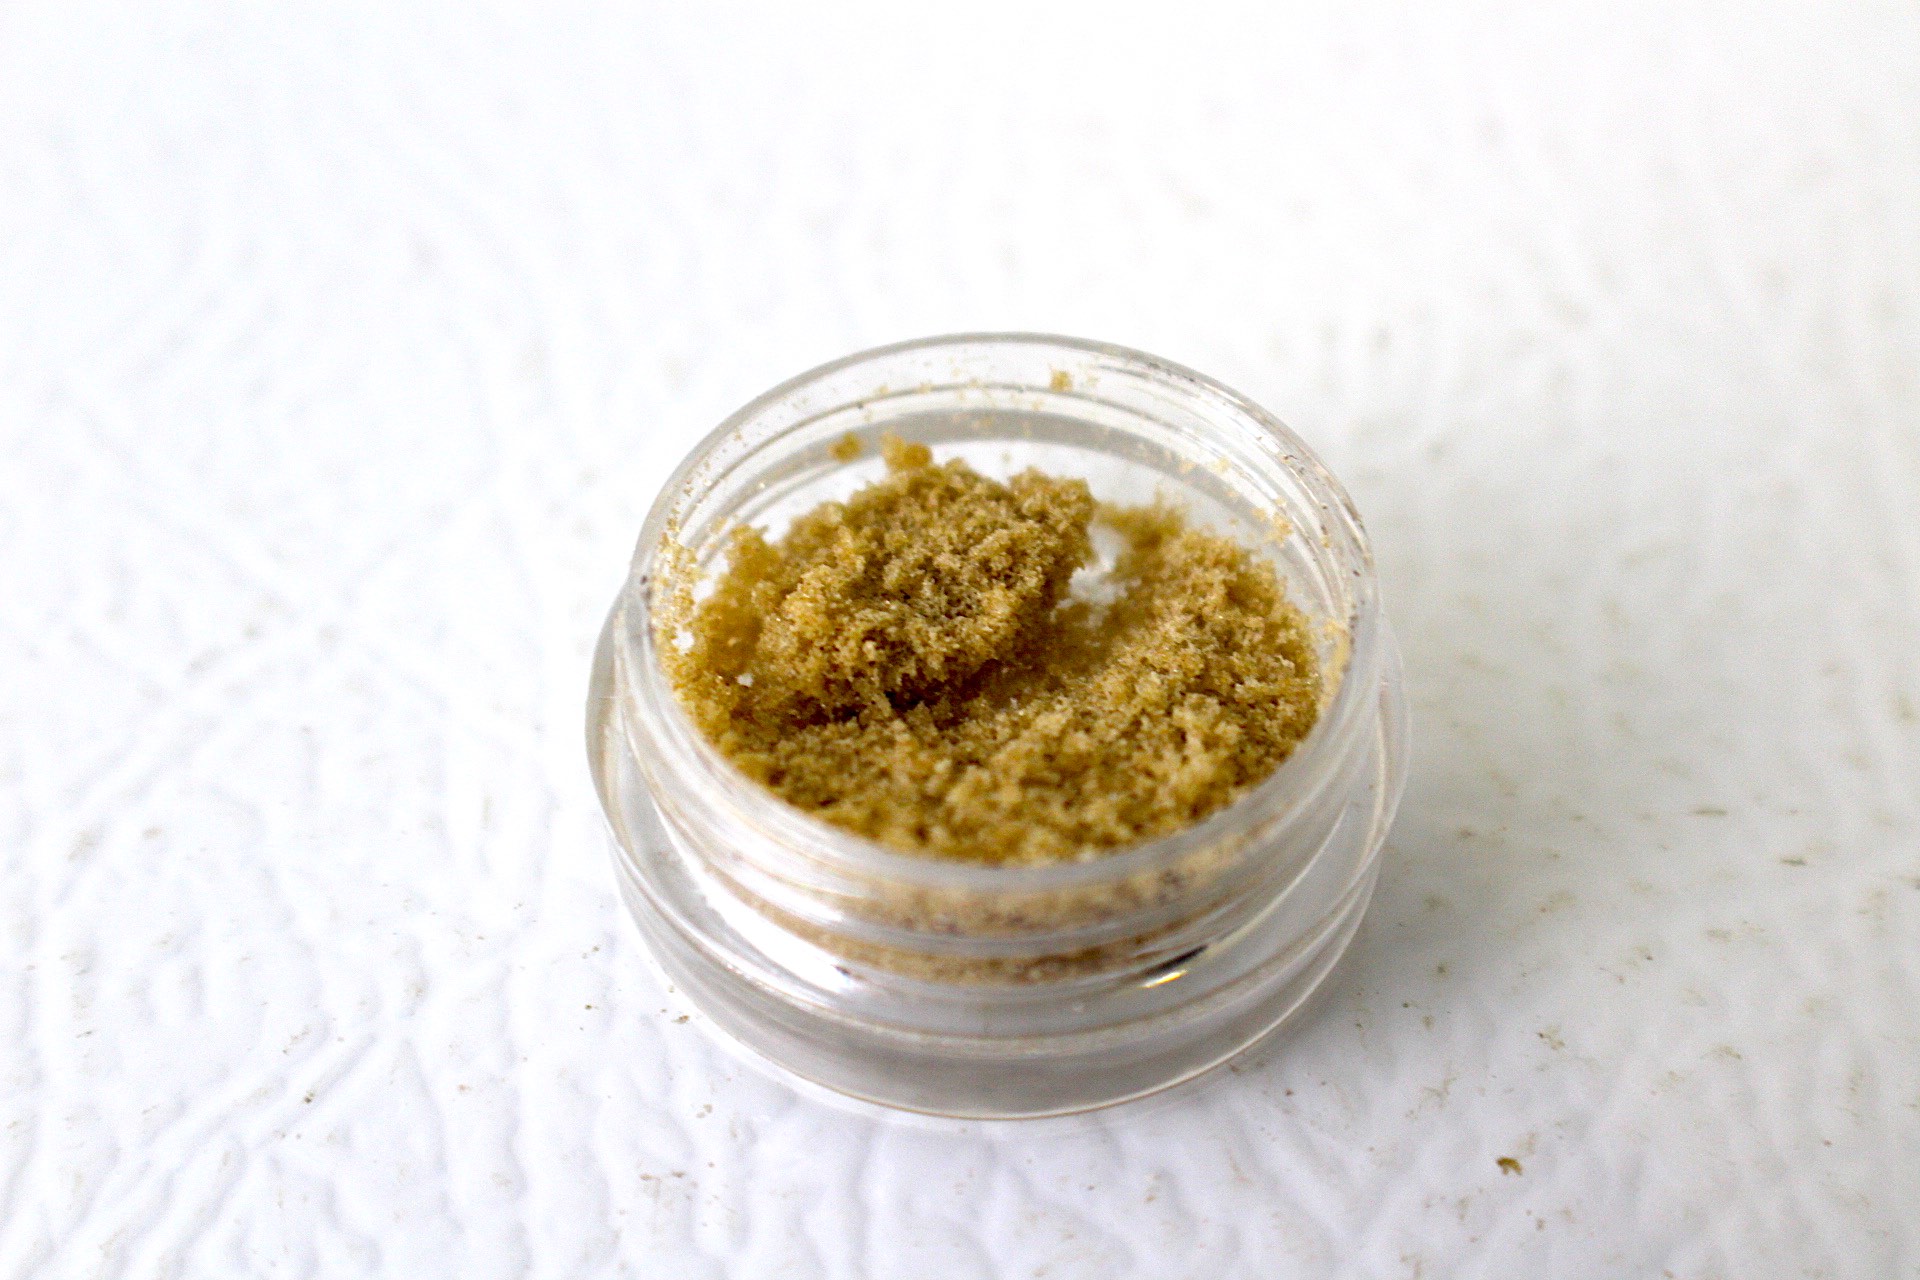 Ice water hash cannabis concentrate